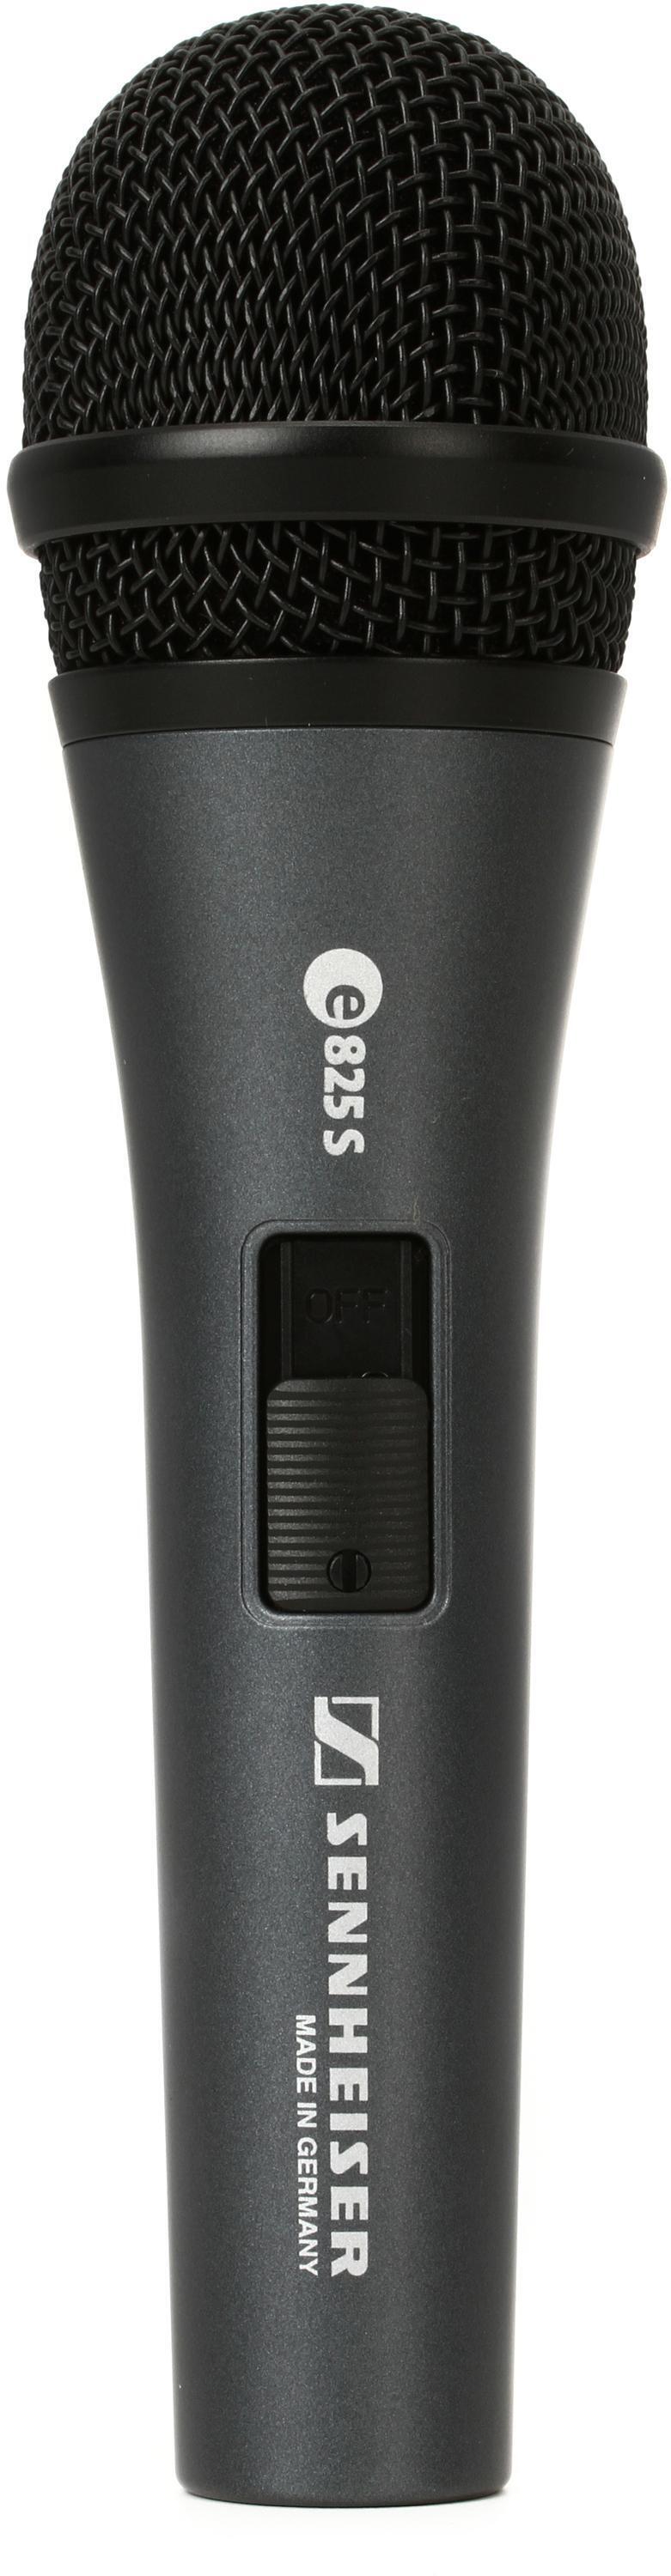 Bundled Item: Sennheiser e 825-S Cardioid Dynamic Vocal Microphone with On/Off Switch